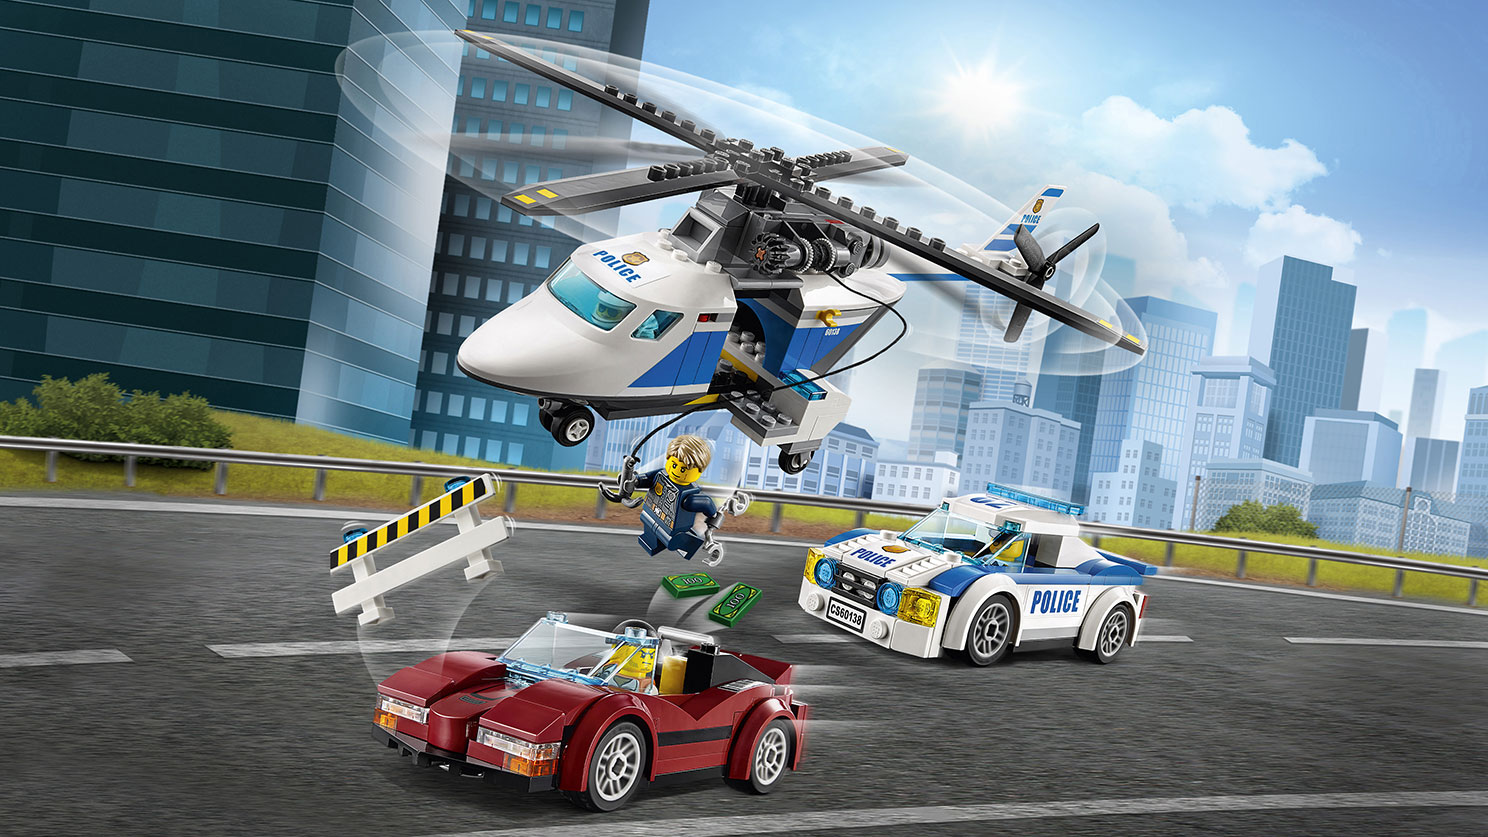 High-speed Chase 60138 - LEGO® City Sets - for kids